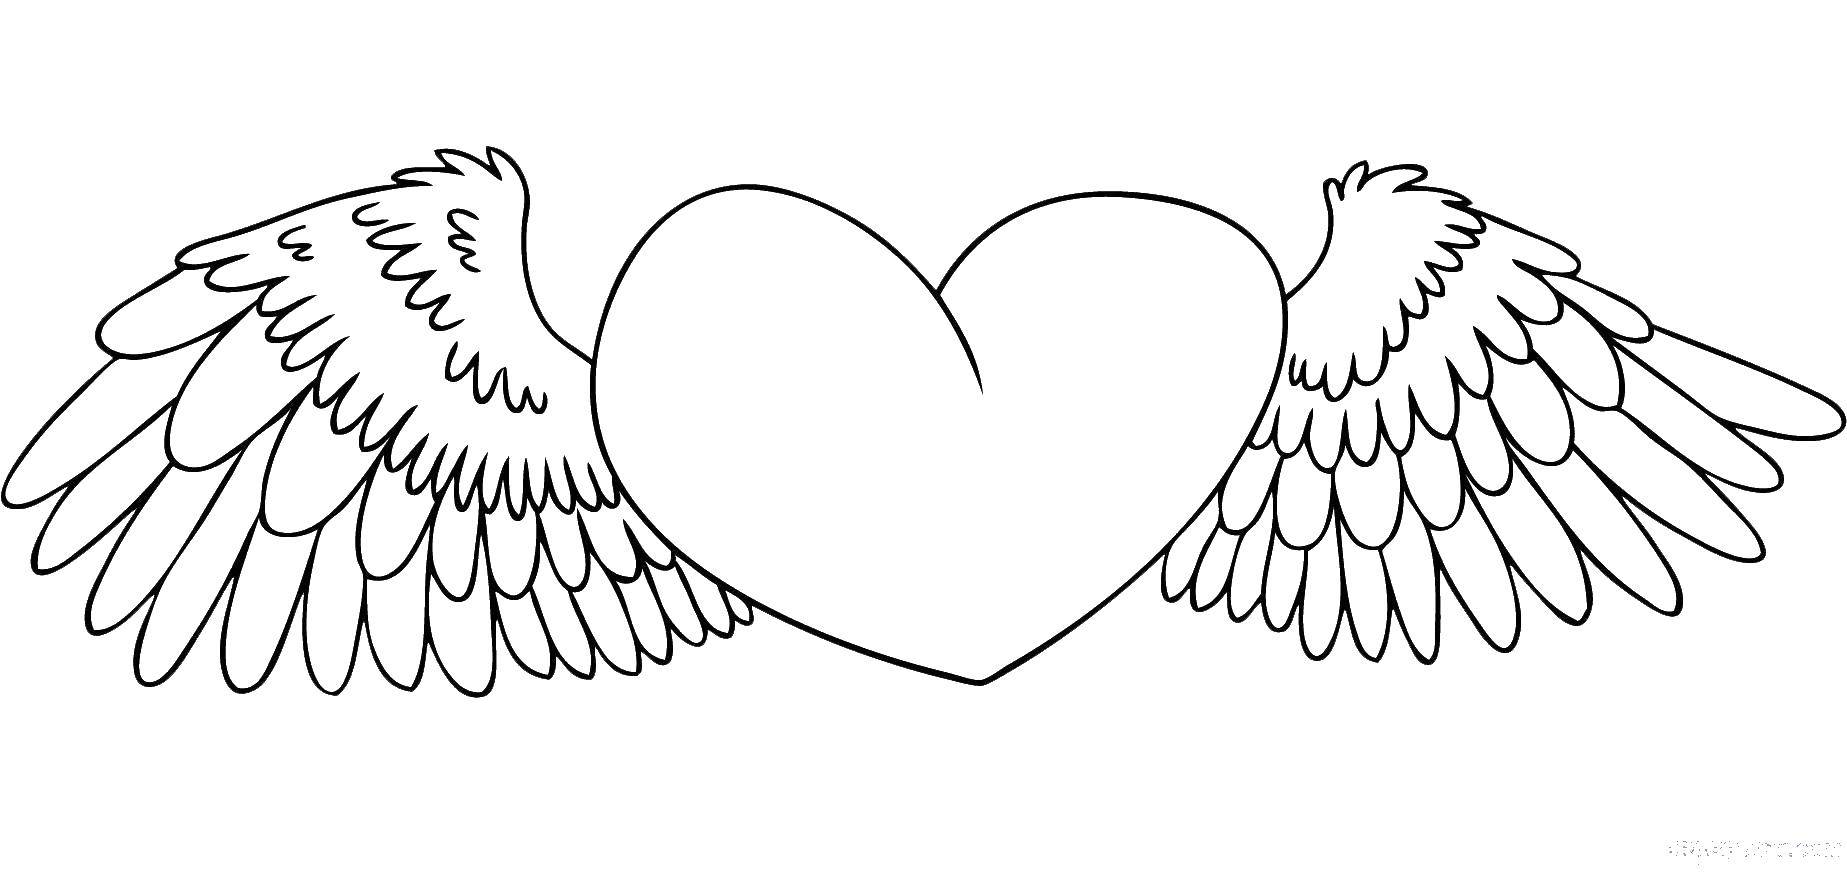 Coloring Heart with wings.. Category Hearts. Tags:  hearts, wings, heart.